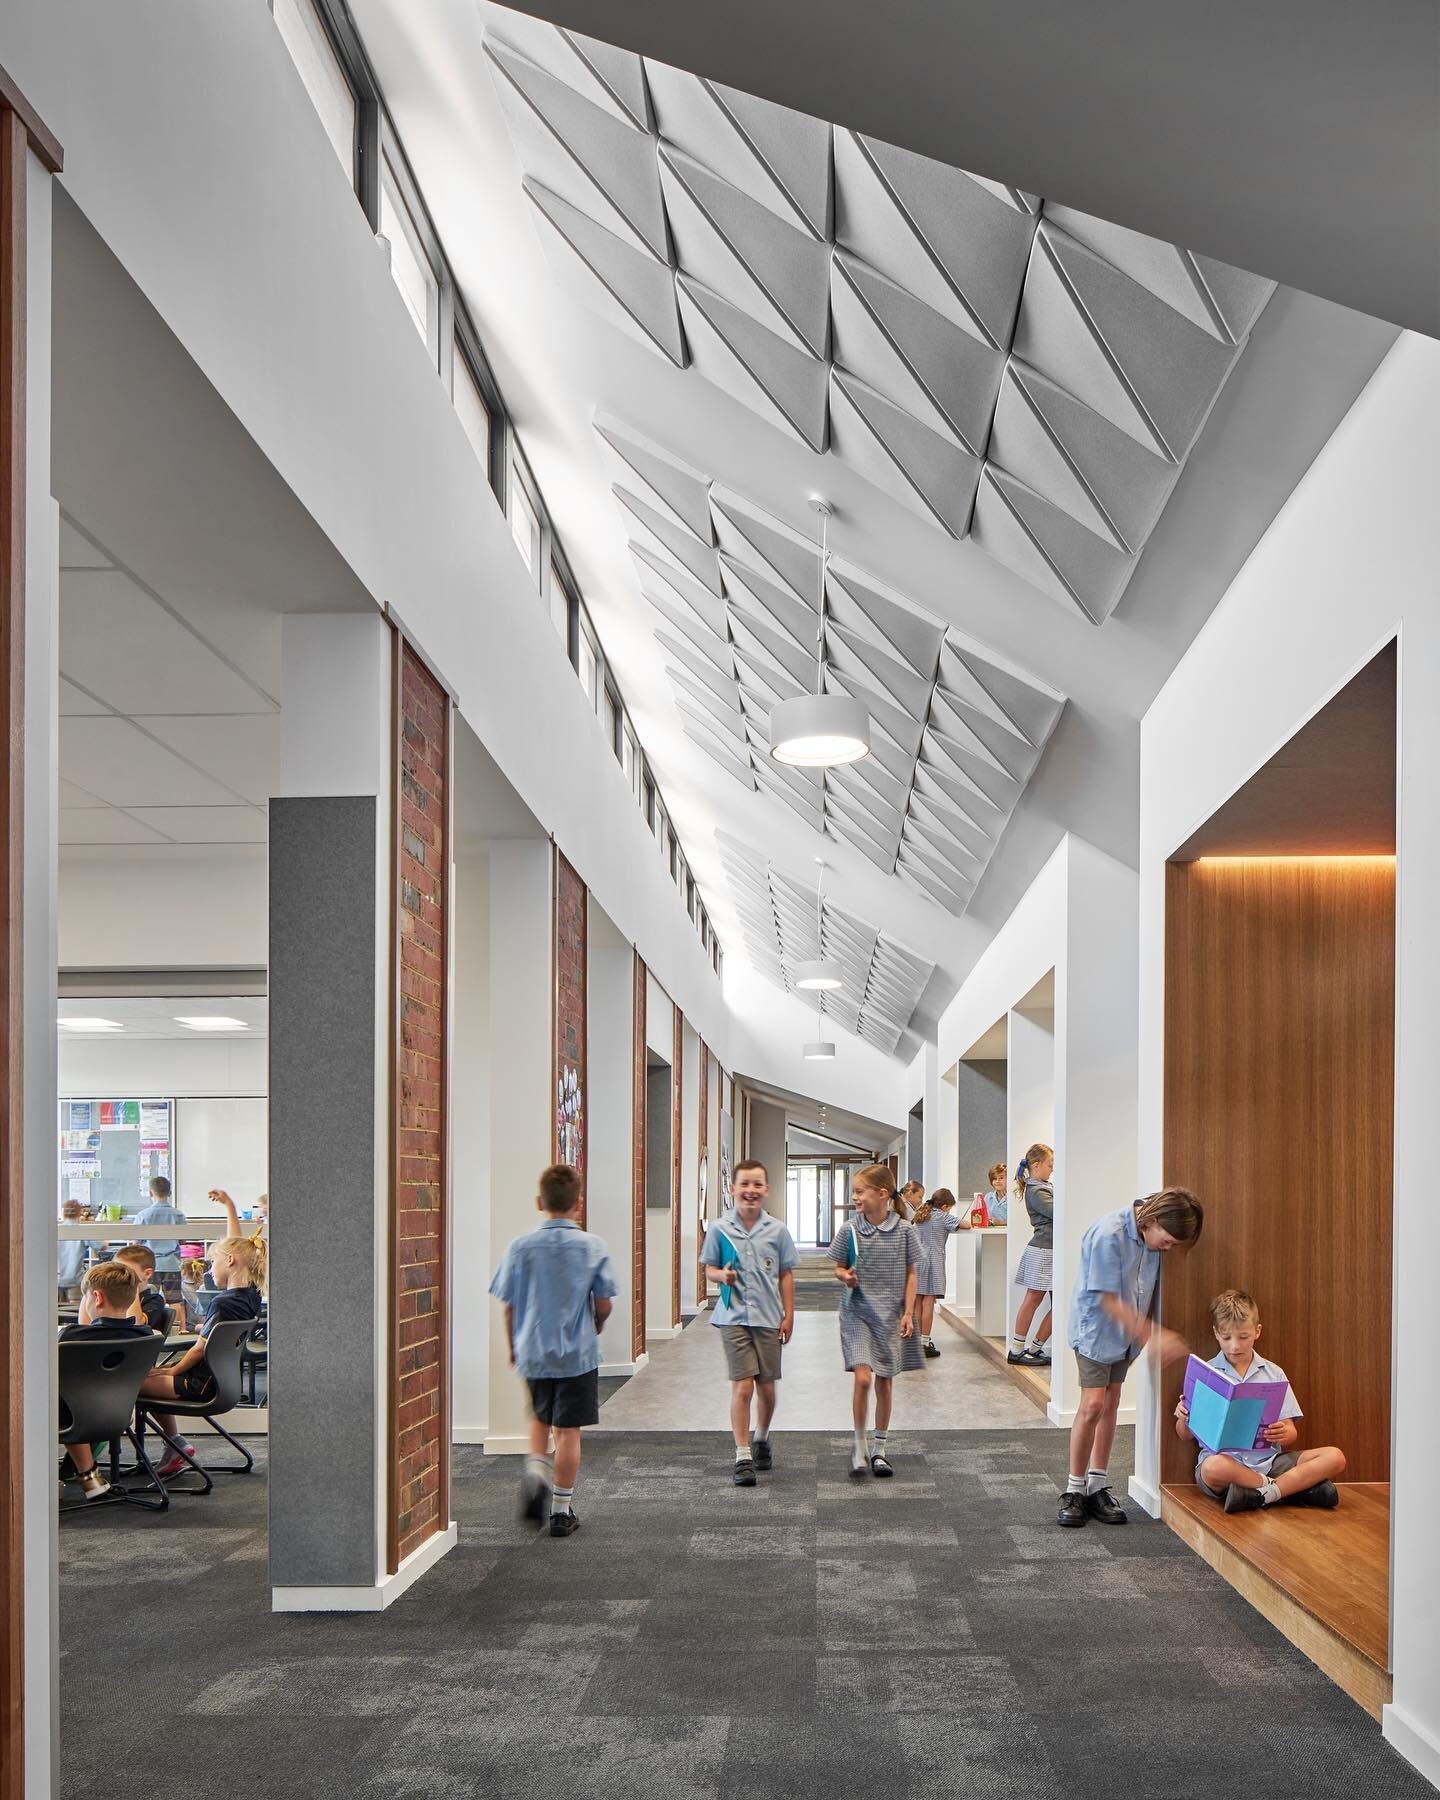 This thoughtful refurbishment at St Therese&rsquo;s School emerged from our masterplan and has revitalised the East and North Buildings within a challenging budget and working with the existing structure to create contemporary learning spaces. The re